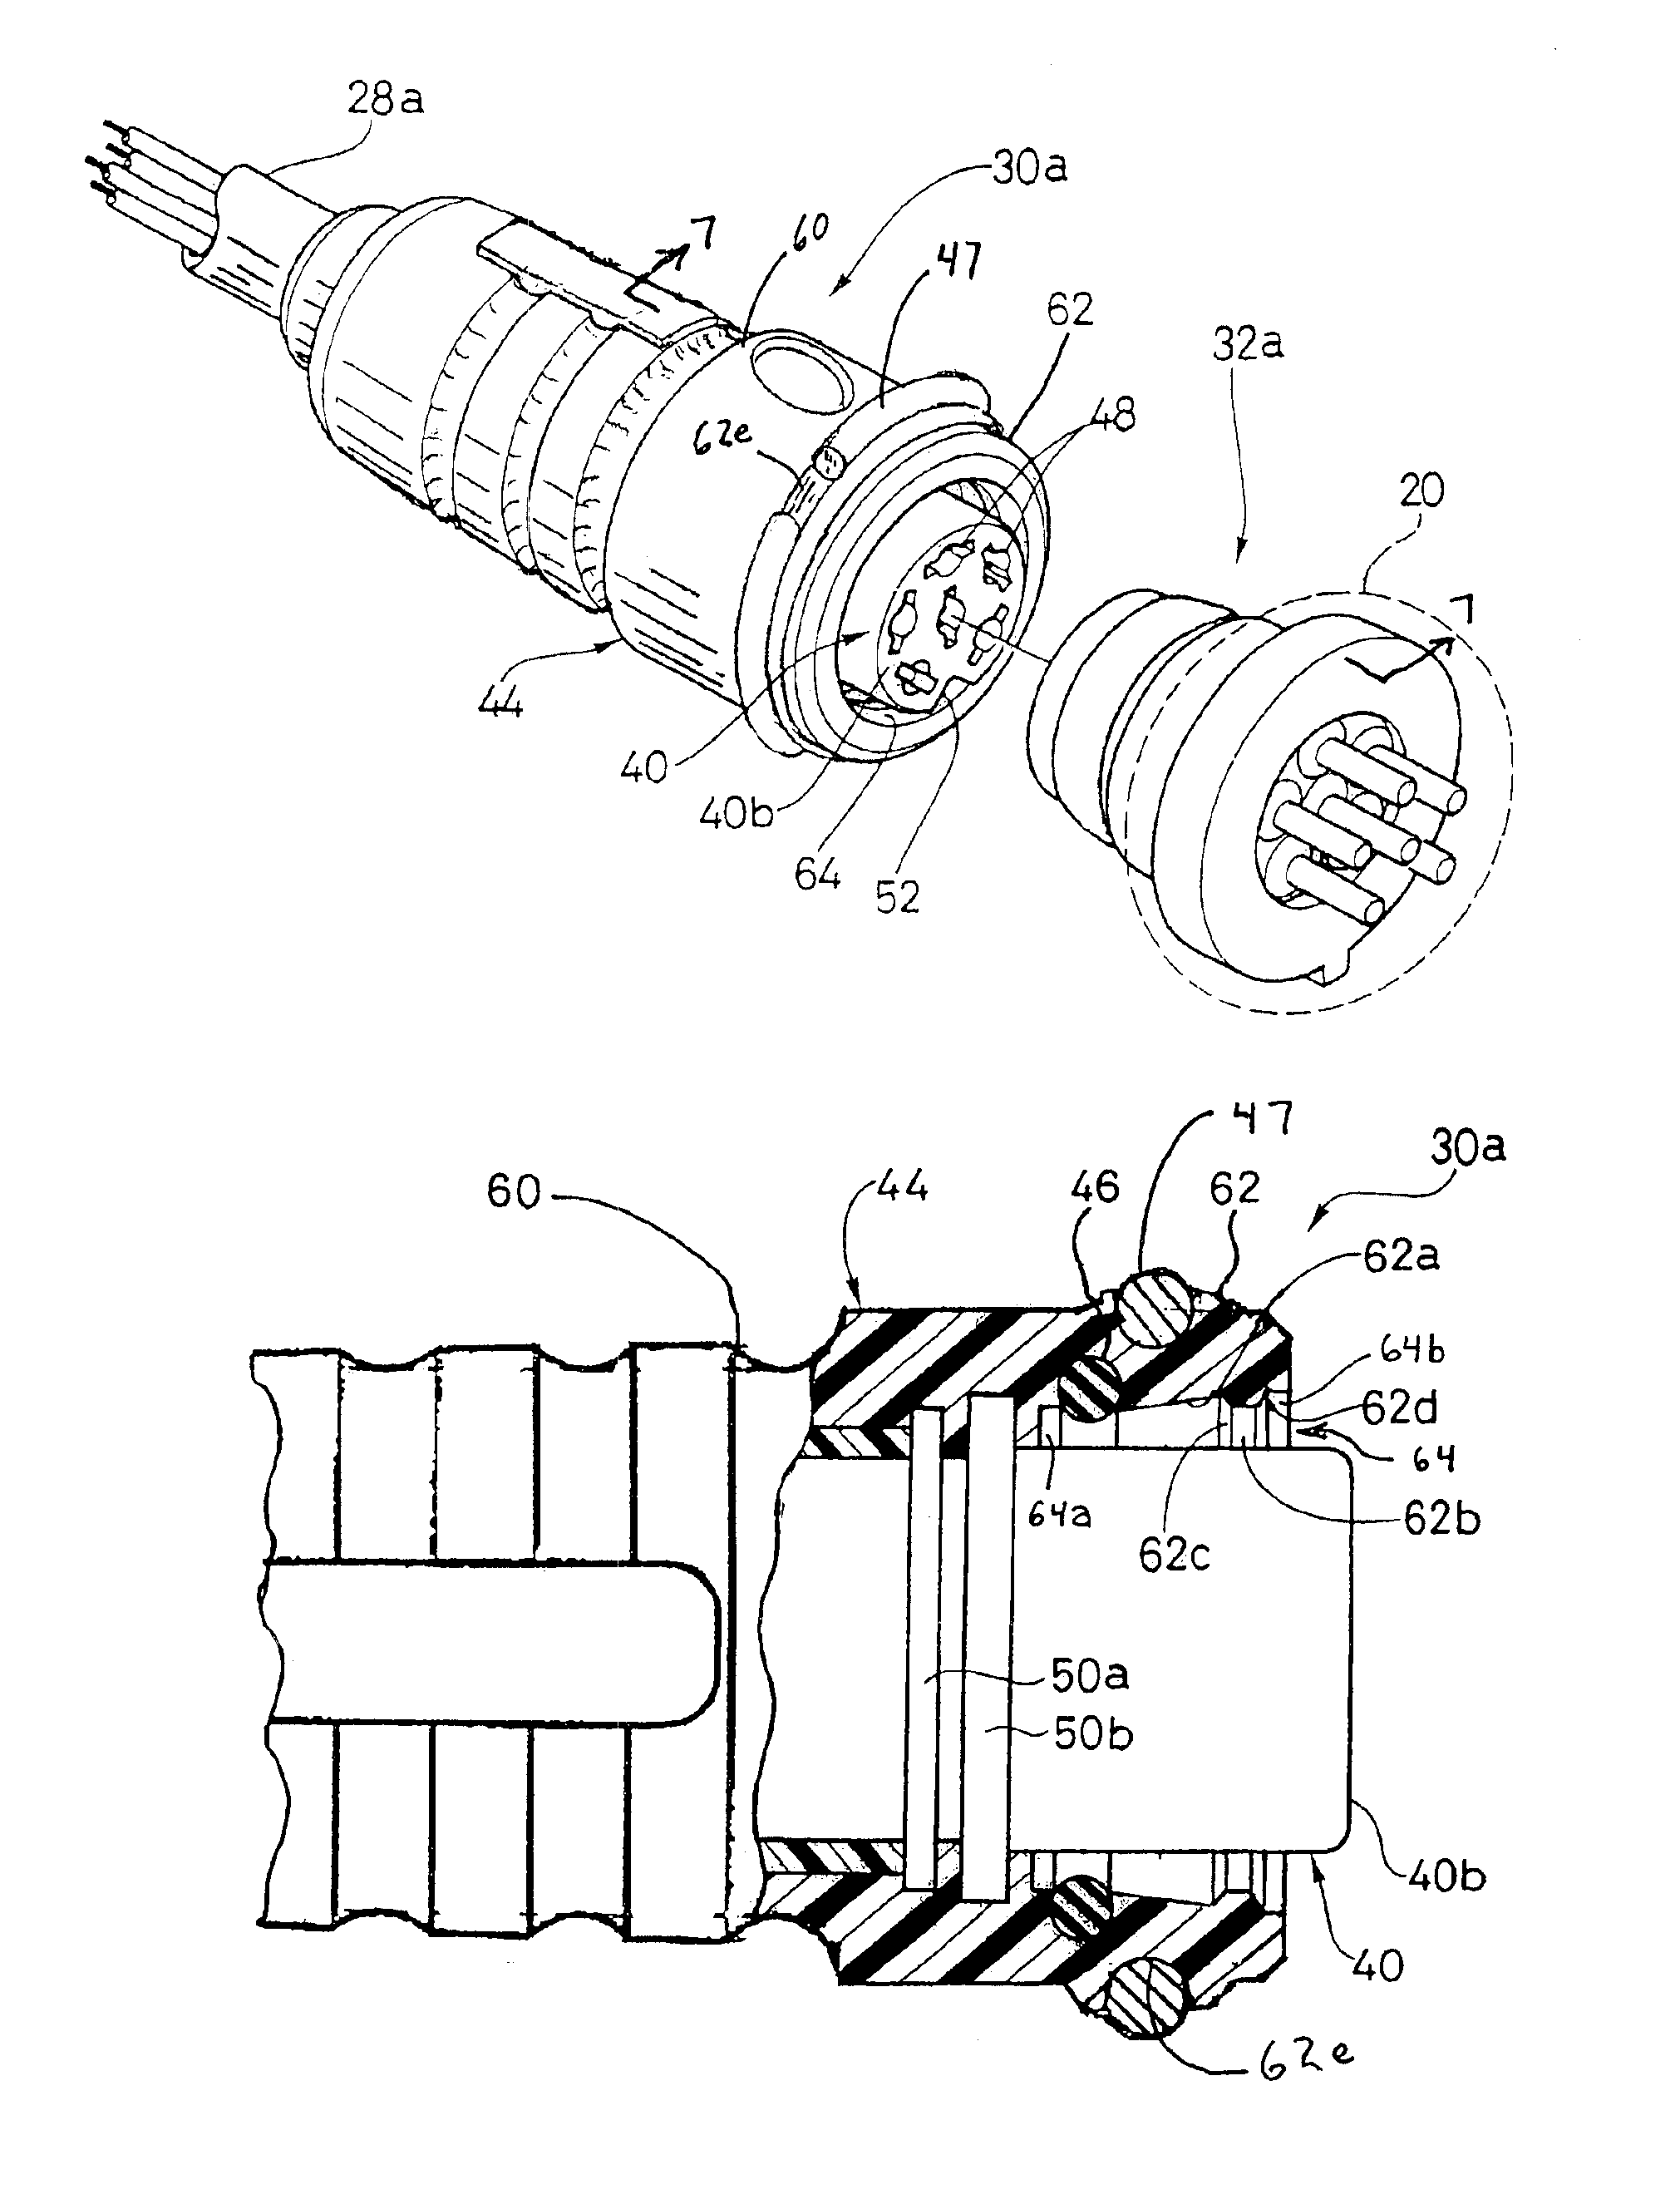 Electrical connector with resilient retaining ring to restrict radial expansion